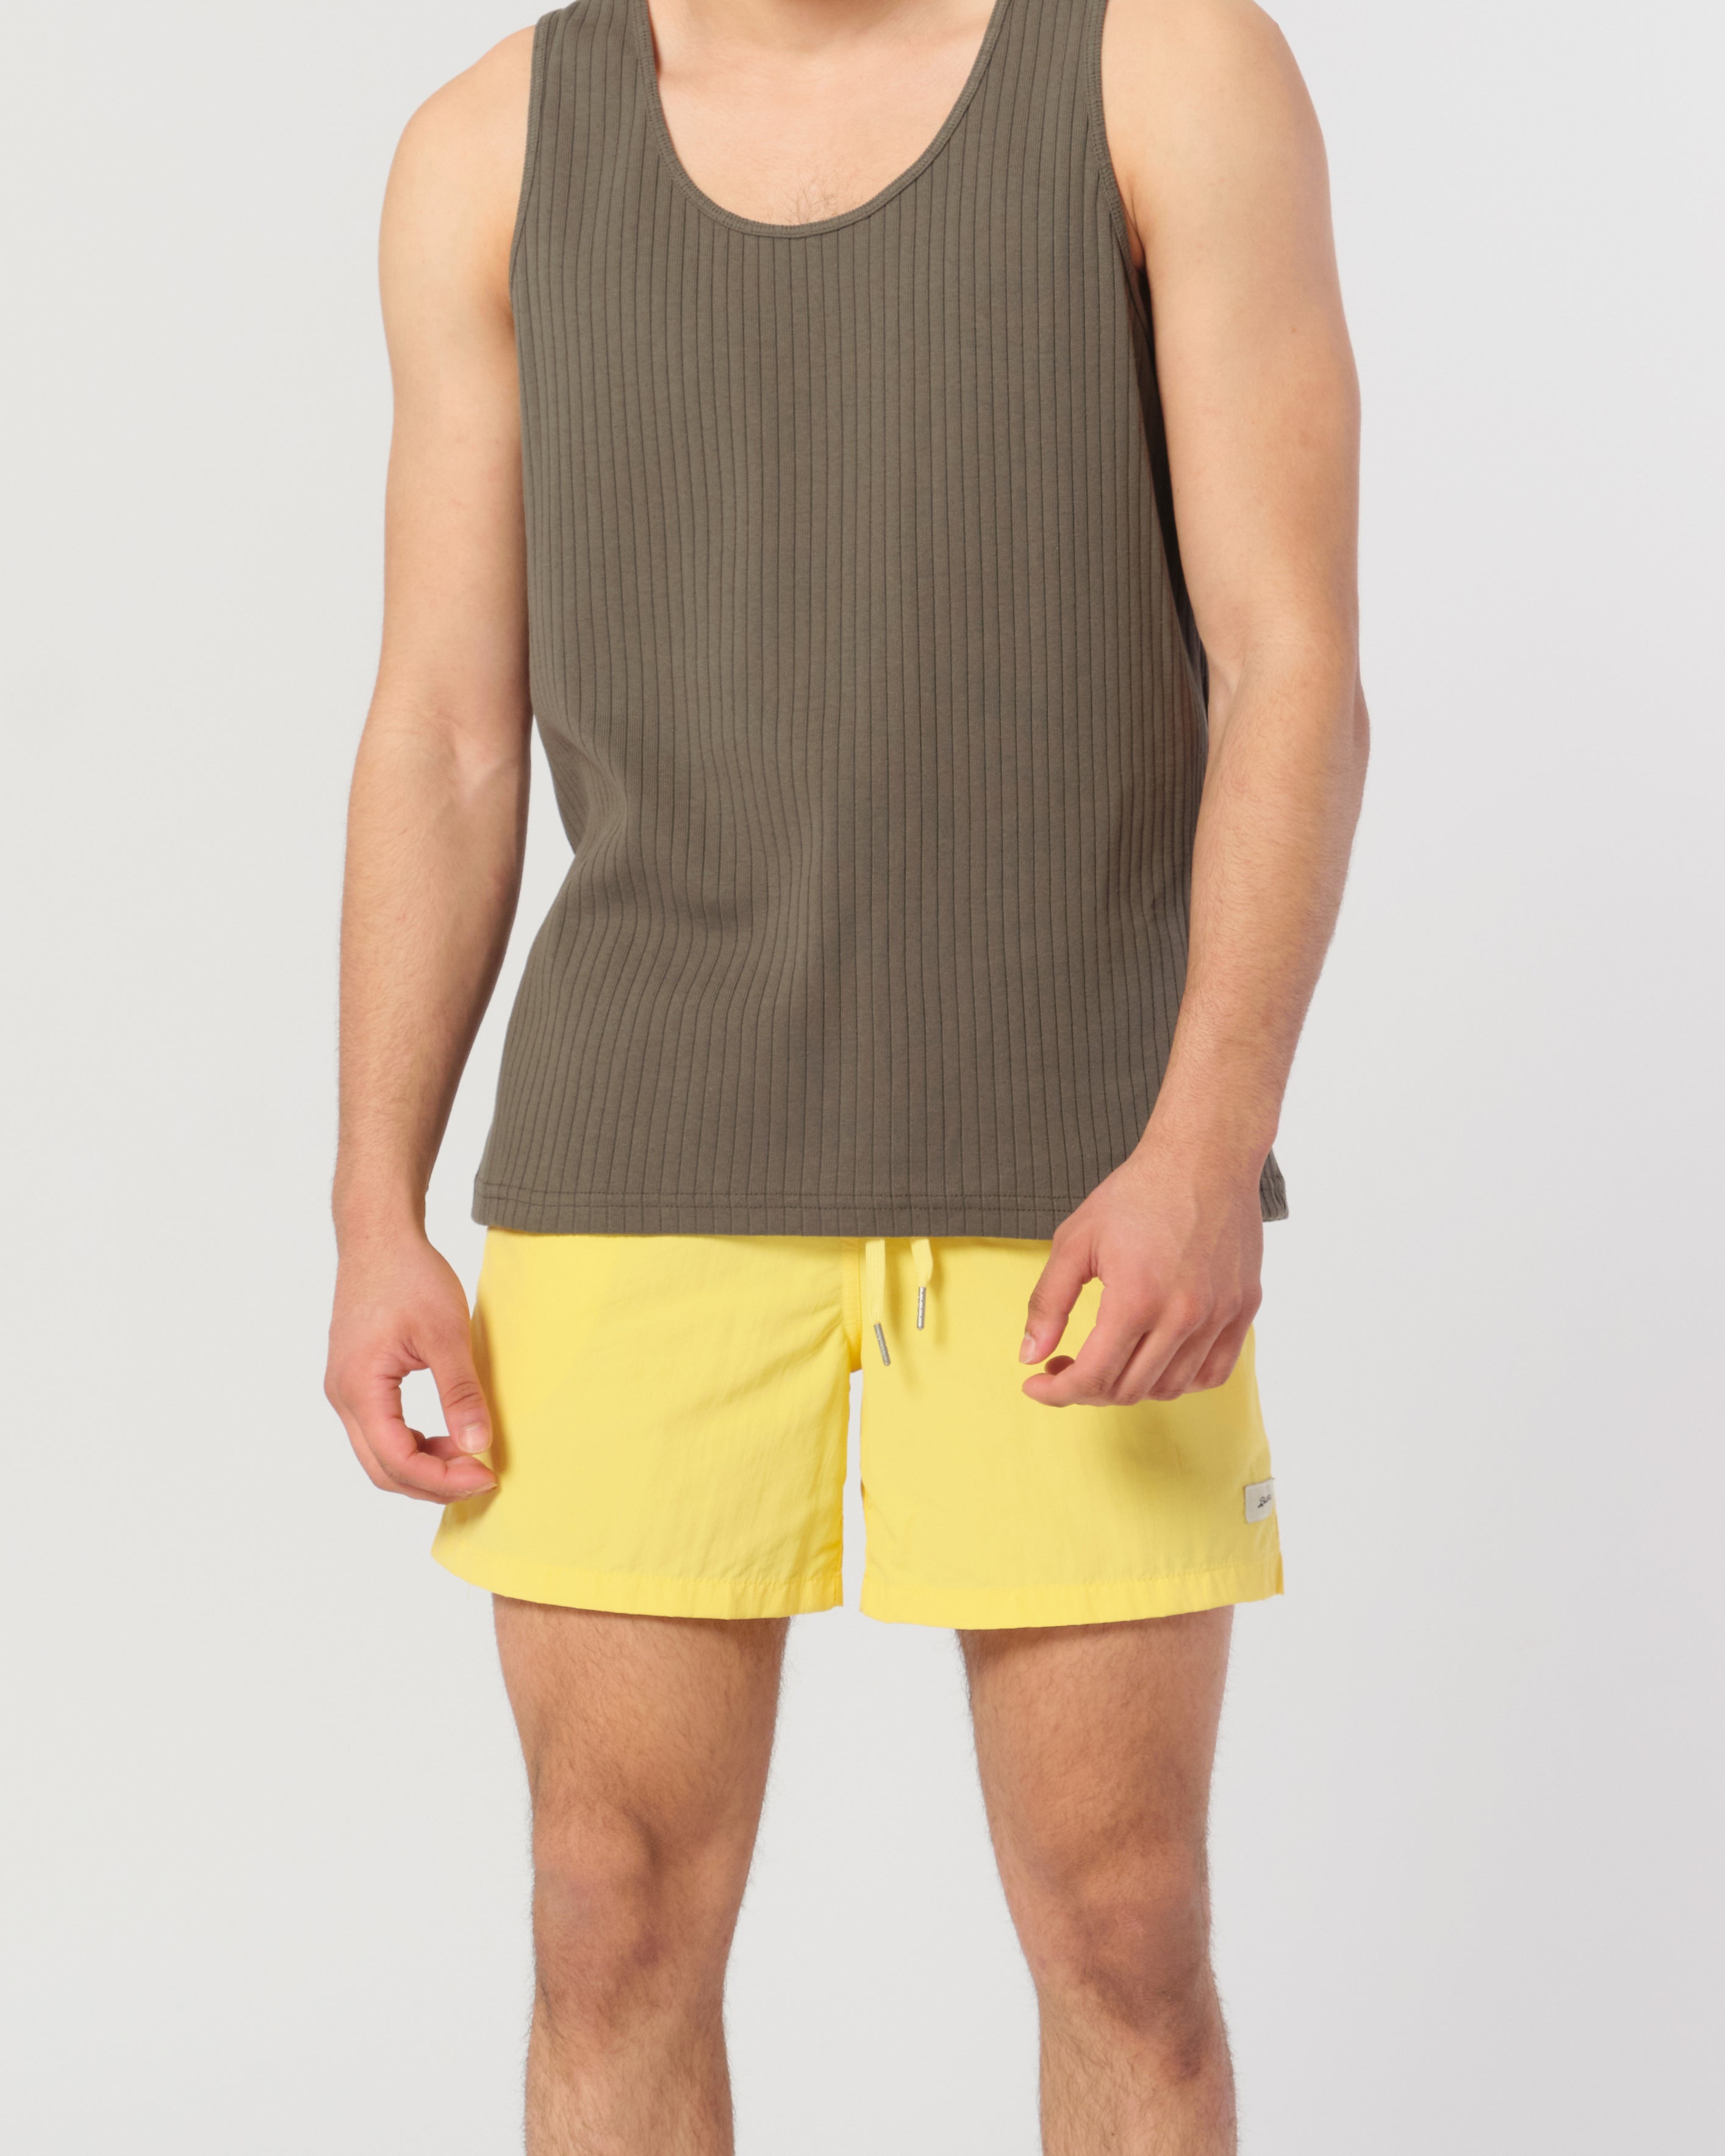 model wearing A solid yellow swim trunk in canary yellow with a matching drawstring